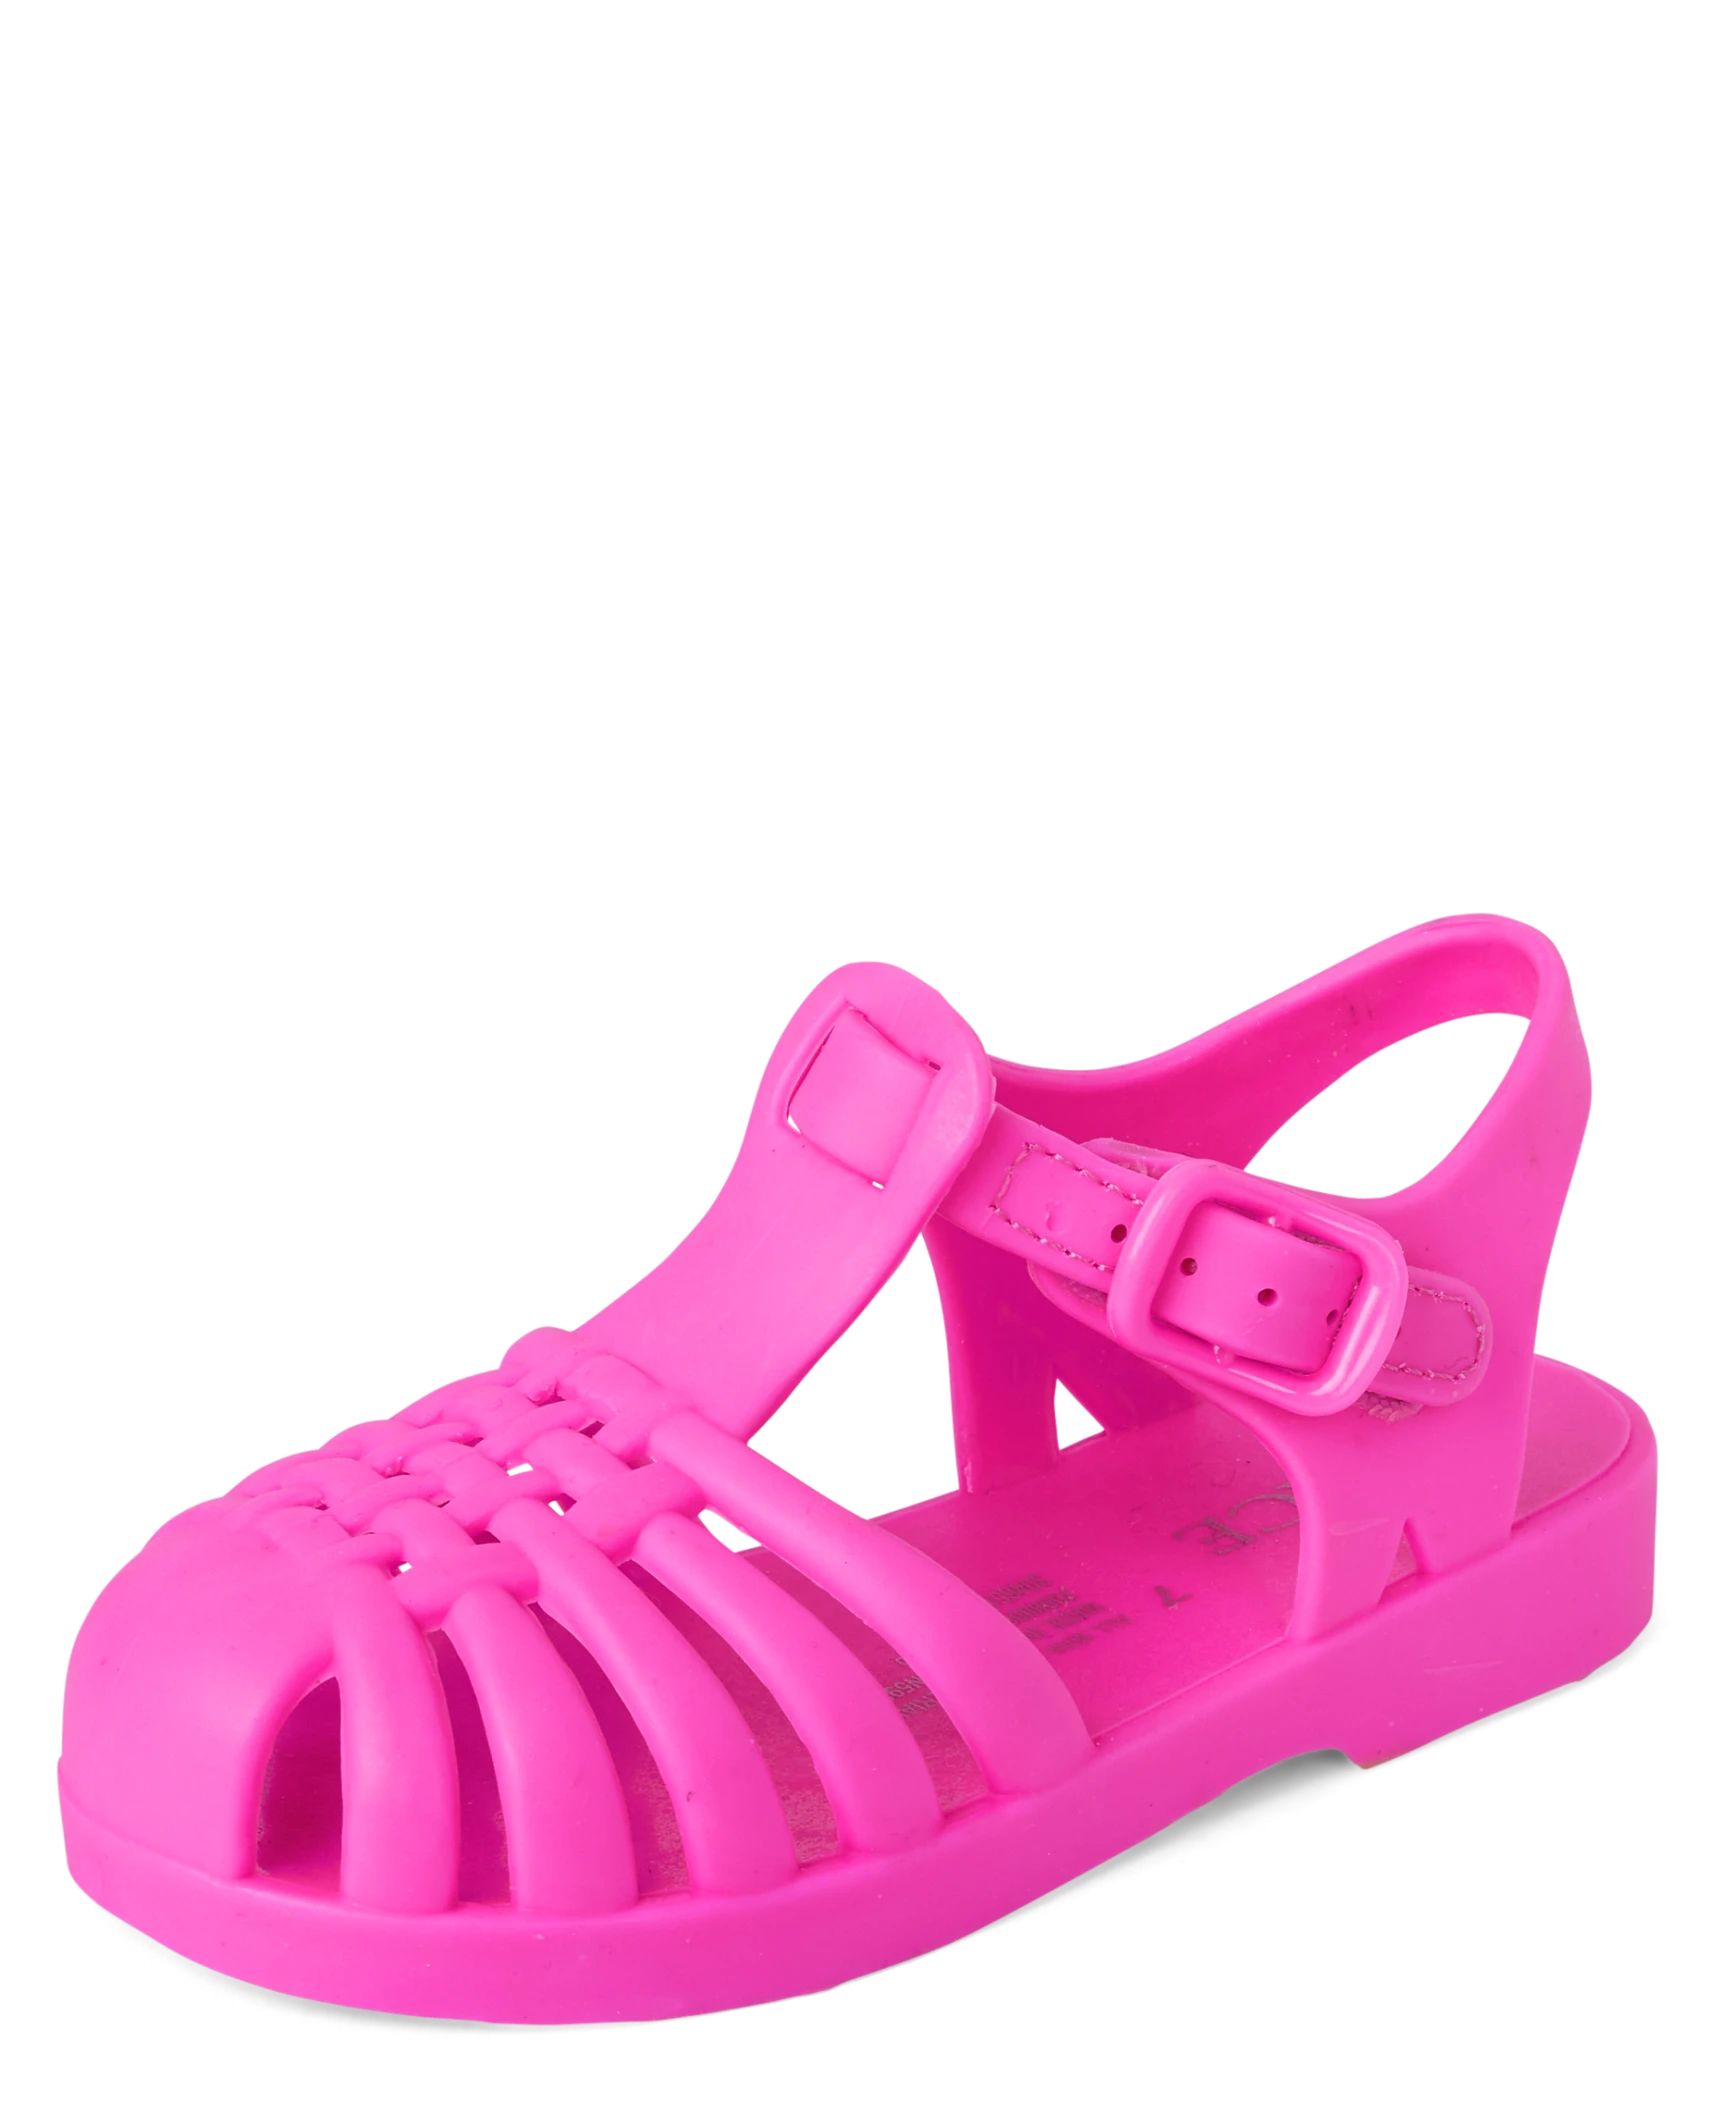 Toddler Girls Jelly Fisherman Sandals | The Children's Place  - PINK | The Children's Place